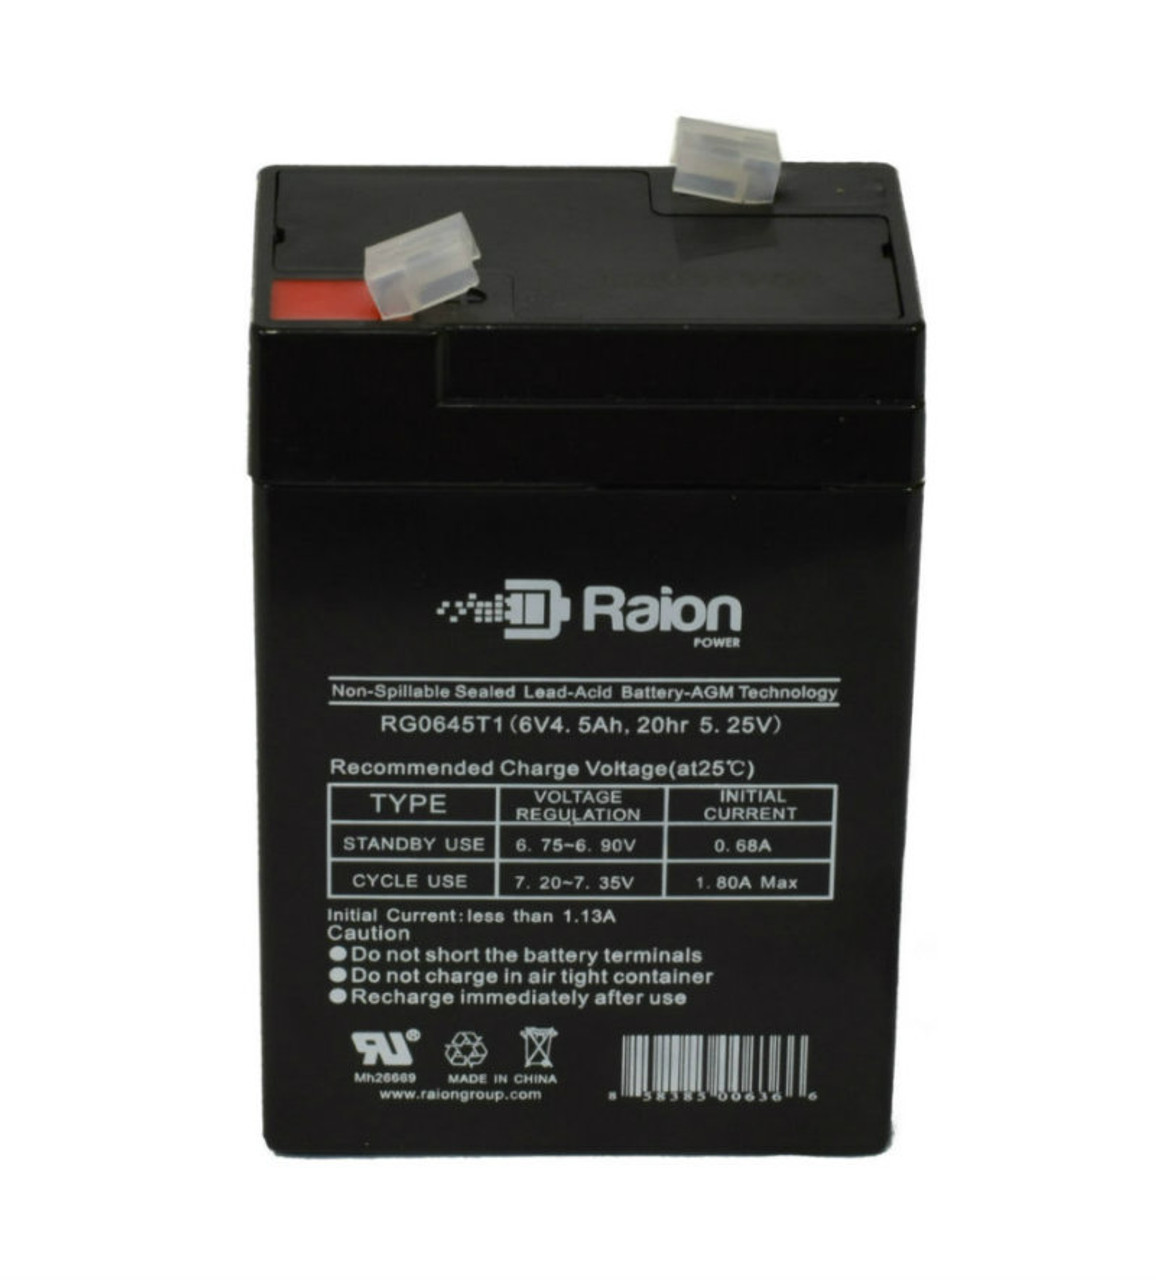 Raion Power RG0645T1 Replacement Battery Cartridge for Peg Perego IGED1162 6V Fiat 500 - Pink